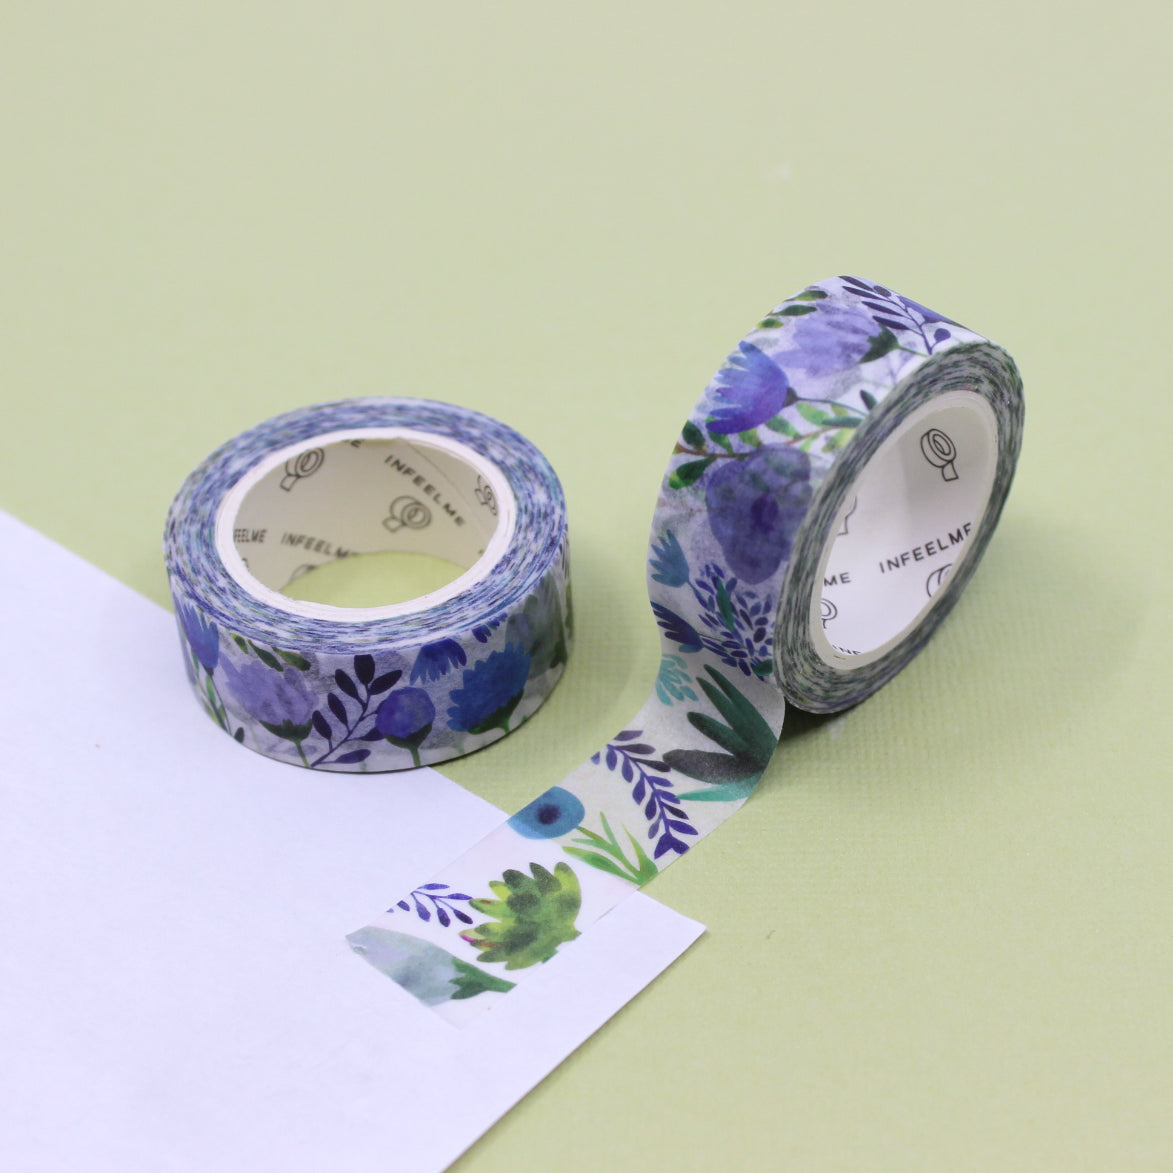 This pretty purple and blue flower tape is a vibrant floral pattern that is perfect for your BUJO and craft projects. Spring is in the air with this gorgeous tape.